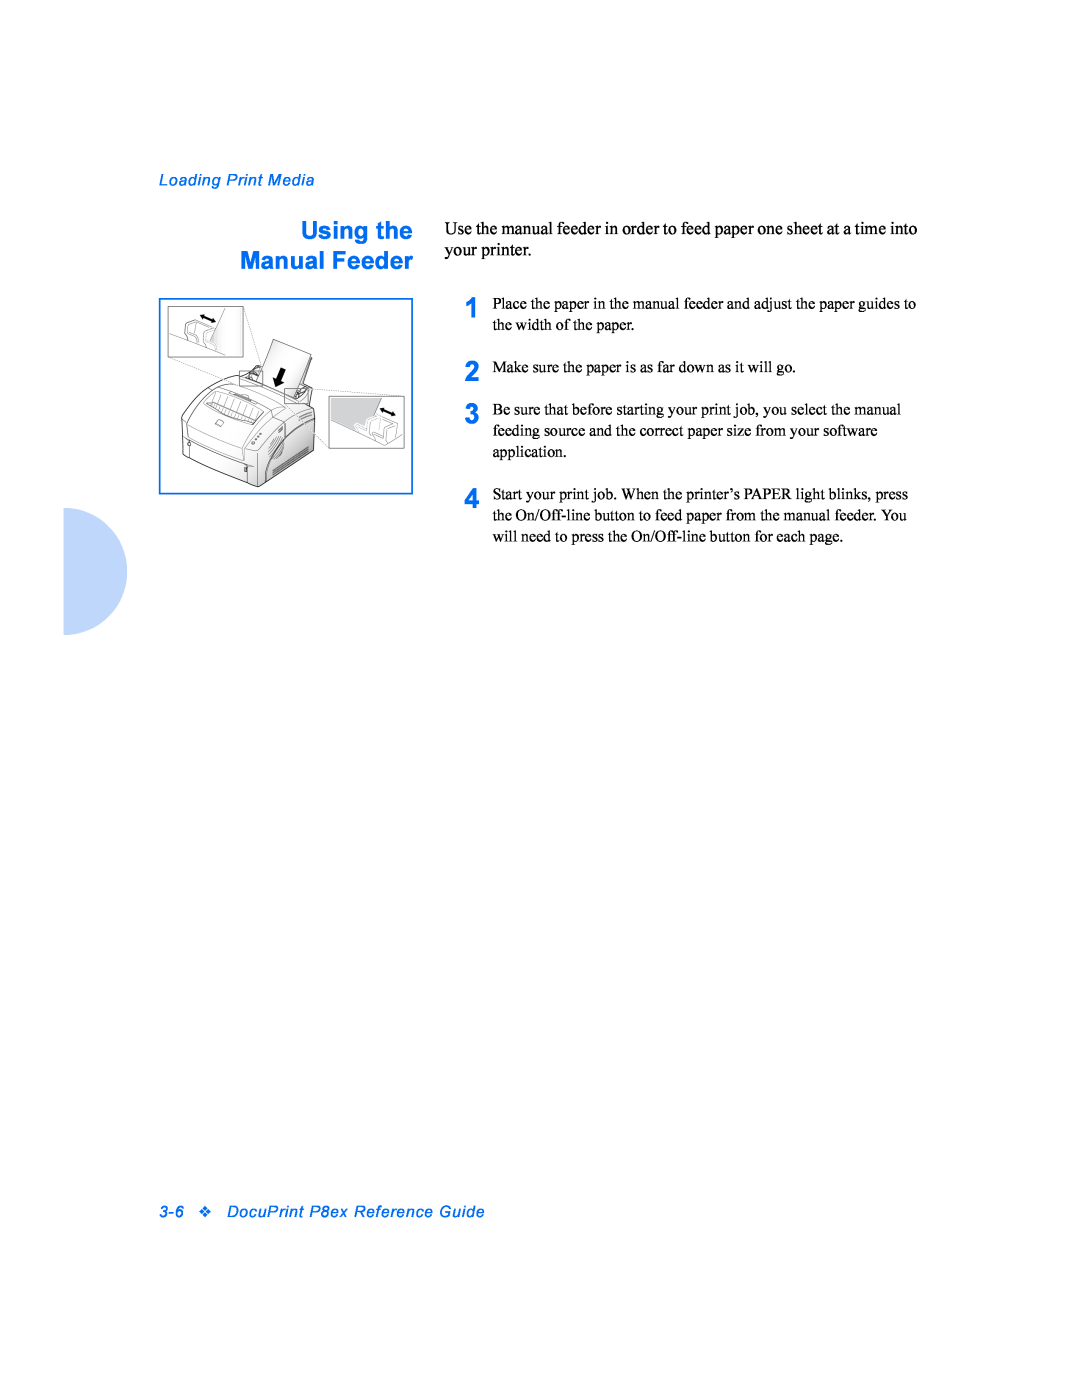 Xerox P8EX manual Using the Manual Feeder, Loading Print Media, 3-6DocuPrint P8ex Reference Guide 